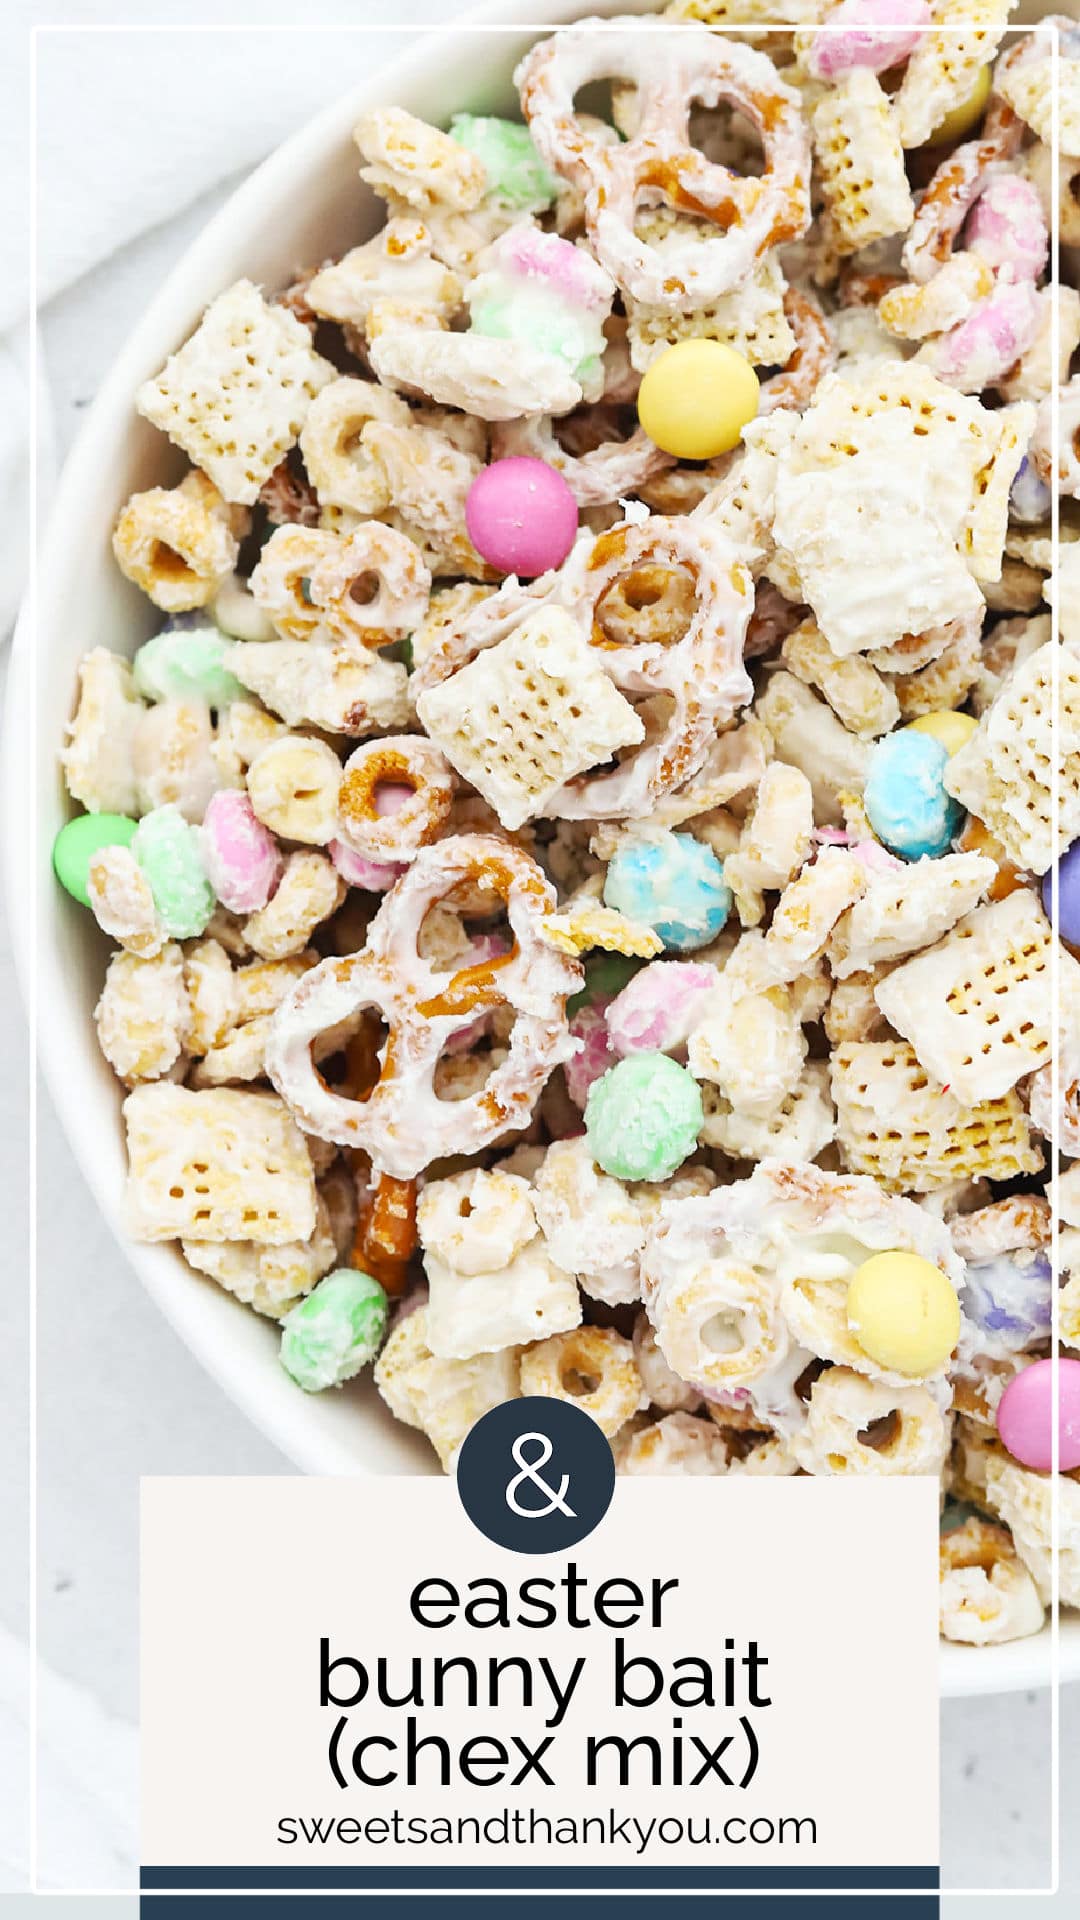 Let's make bunny bait! This sweet Easter Chex Mix is quick, easy, and majorly addictive. A delightful Easter dessert recipe! (Gluten-Free) // Sweet Easter Chex Mix // Sweet Easter Snack Mix // No-Bake Easter Dessert // Easter Bunny Bait // Easter Bunny Snack Mix // Kids Easter Snack // Easy Easter Treat // Gluten-Free Easter Dessert // Gluten-Free Easter Snack Mix // Gluten-Free Easter Treat // sweet Chex Mix recipe // Chex Mix with m&ms